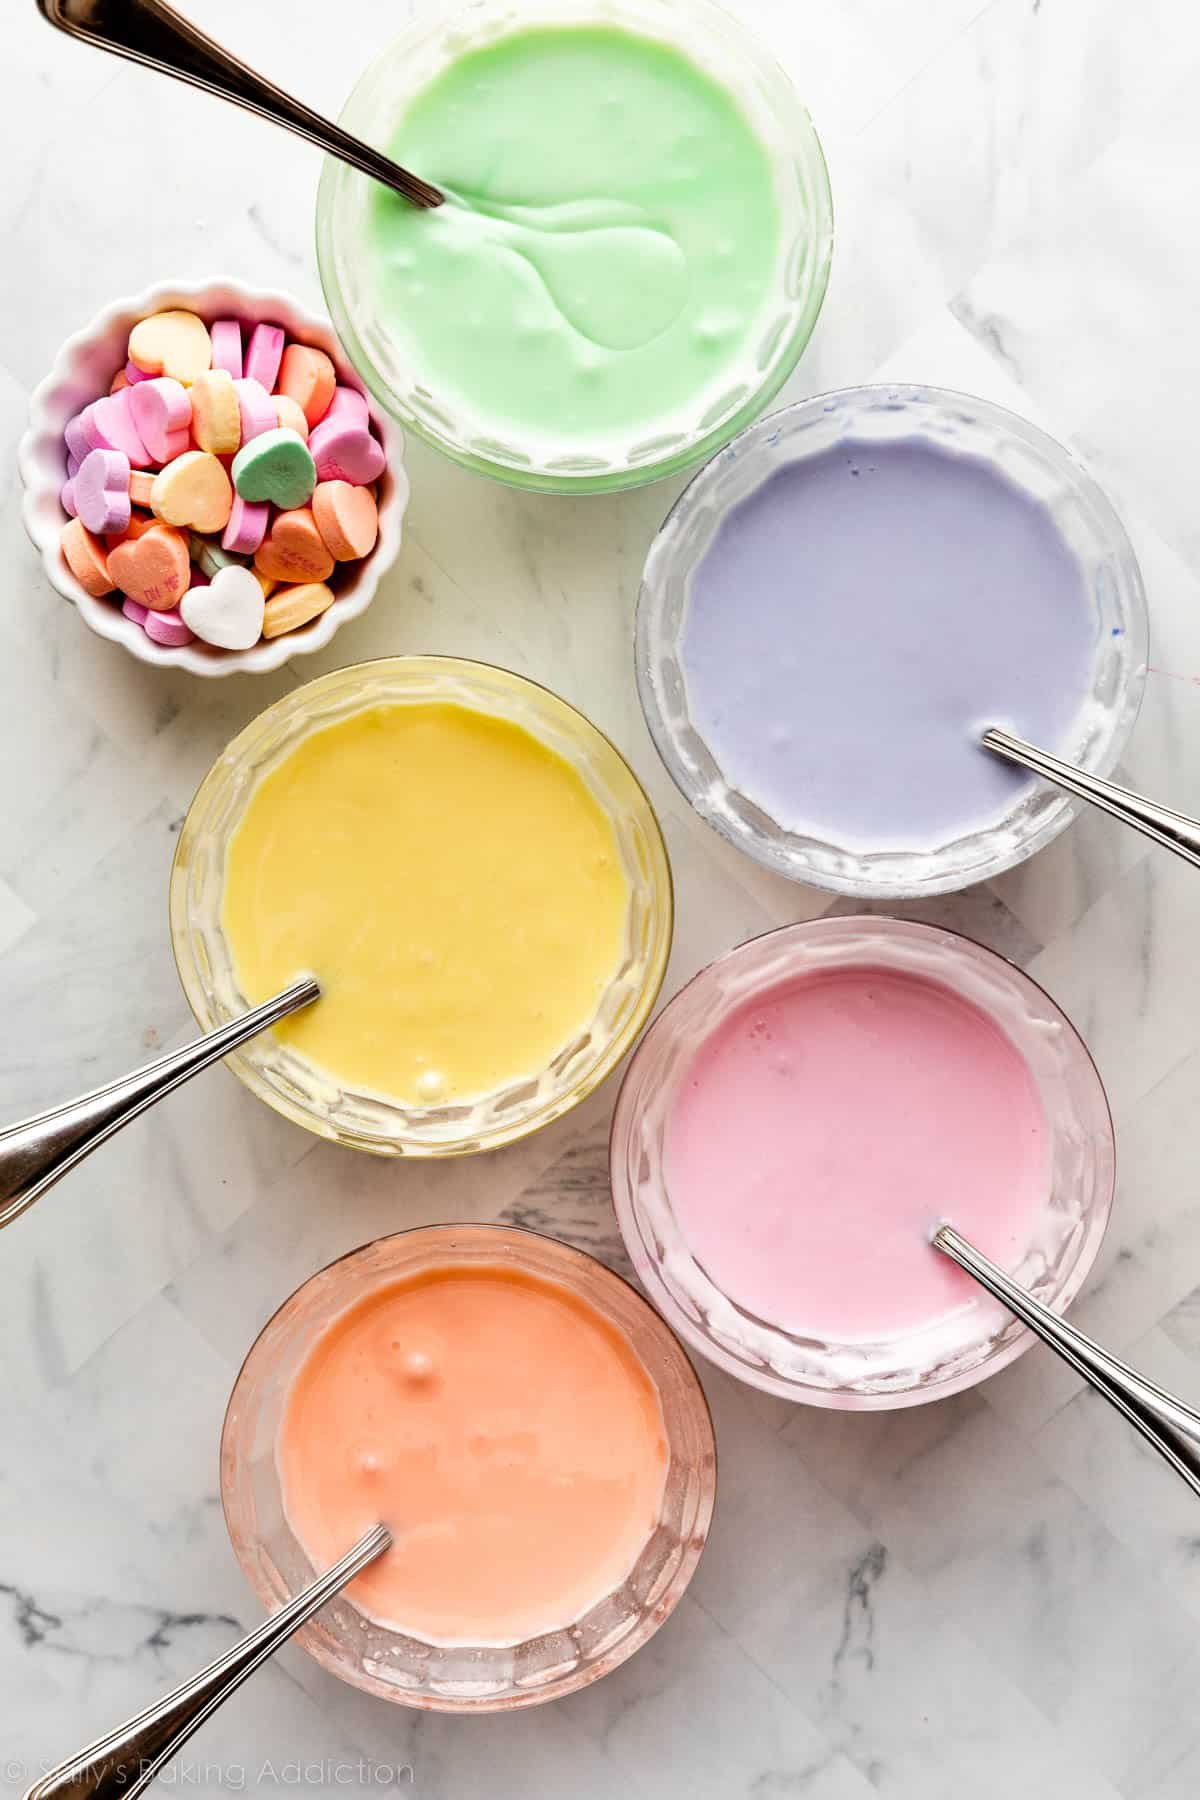 5 small glass bowls of pastel colored icing.